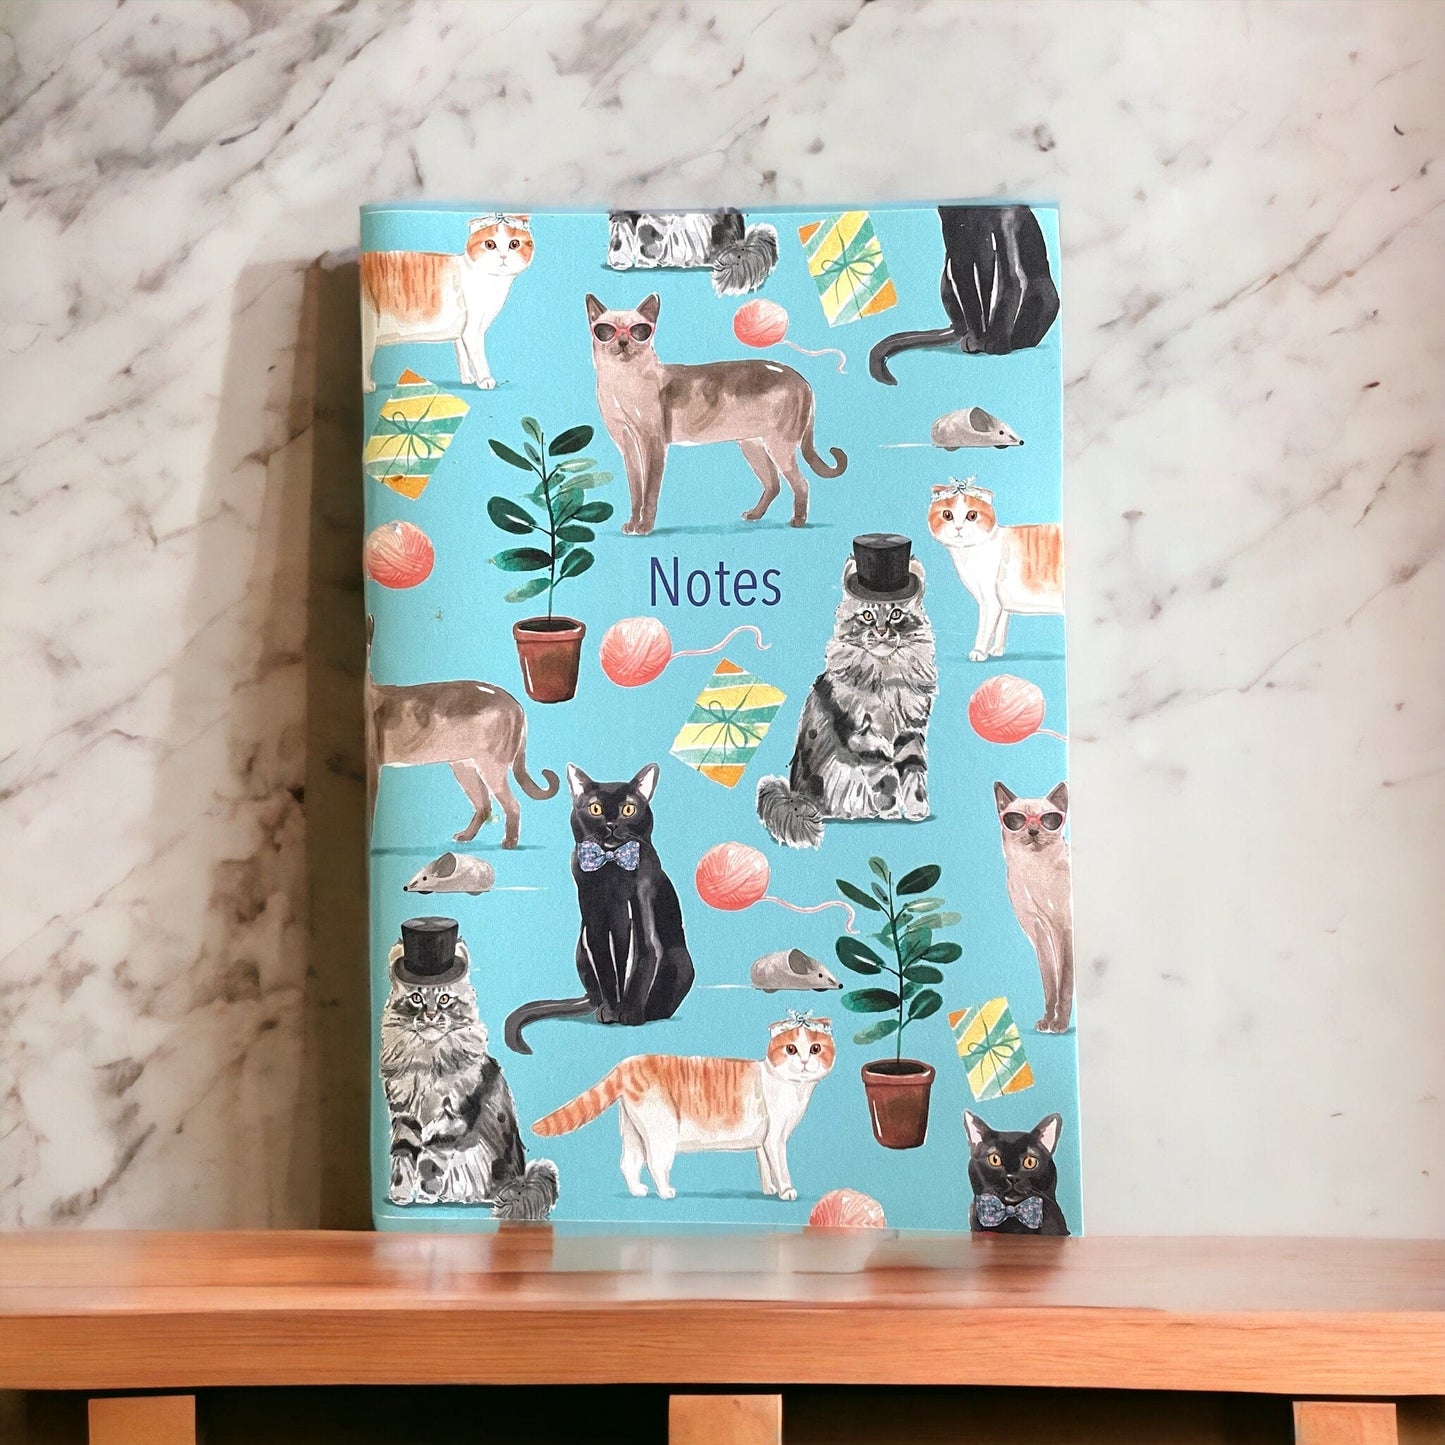 And Hope Designs Notebook Cool cats A5 lined notebook